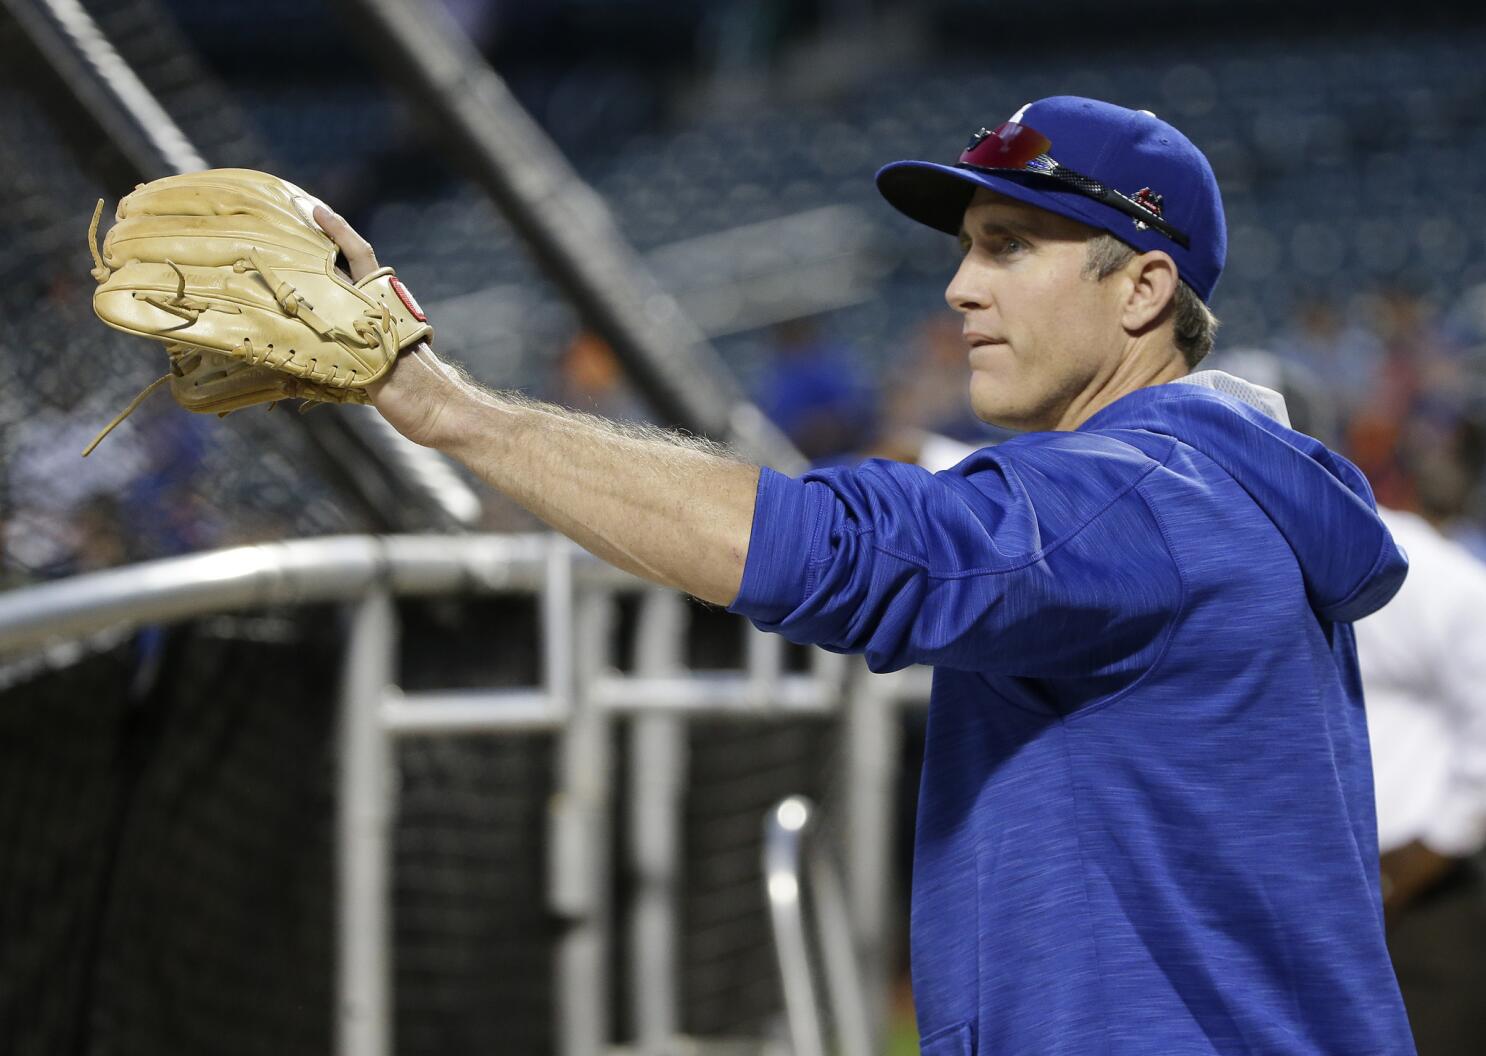 Deciding Utley's Appeal Could Take Several Days - The New York Times